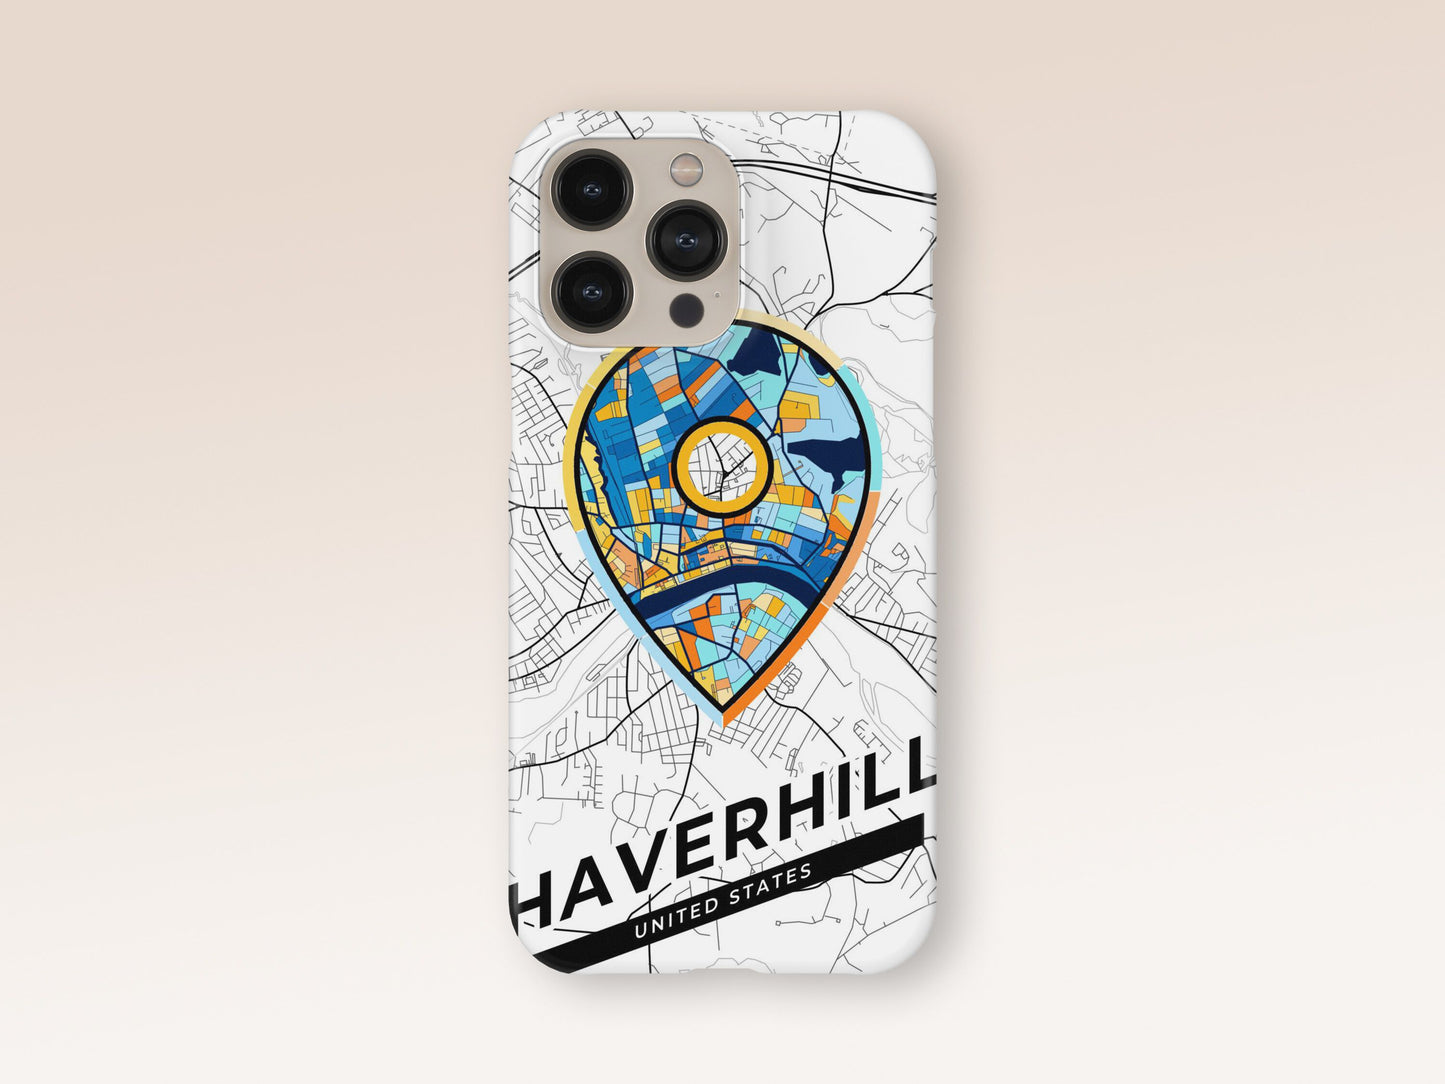 Haverhill Massachusetts slim phone case with colorful icon. Birthday, wedding or housewarming gift. Couple match cases. 1